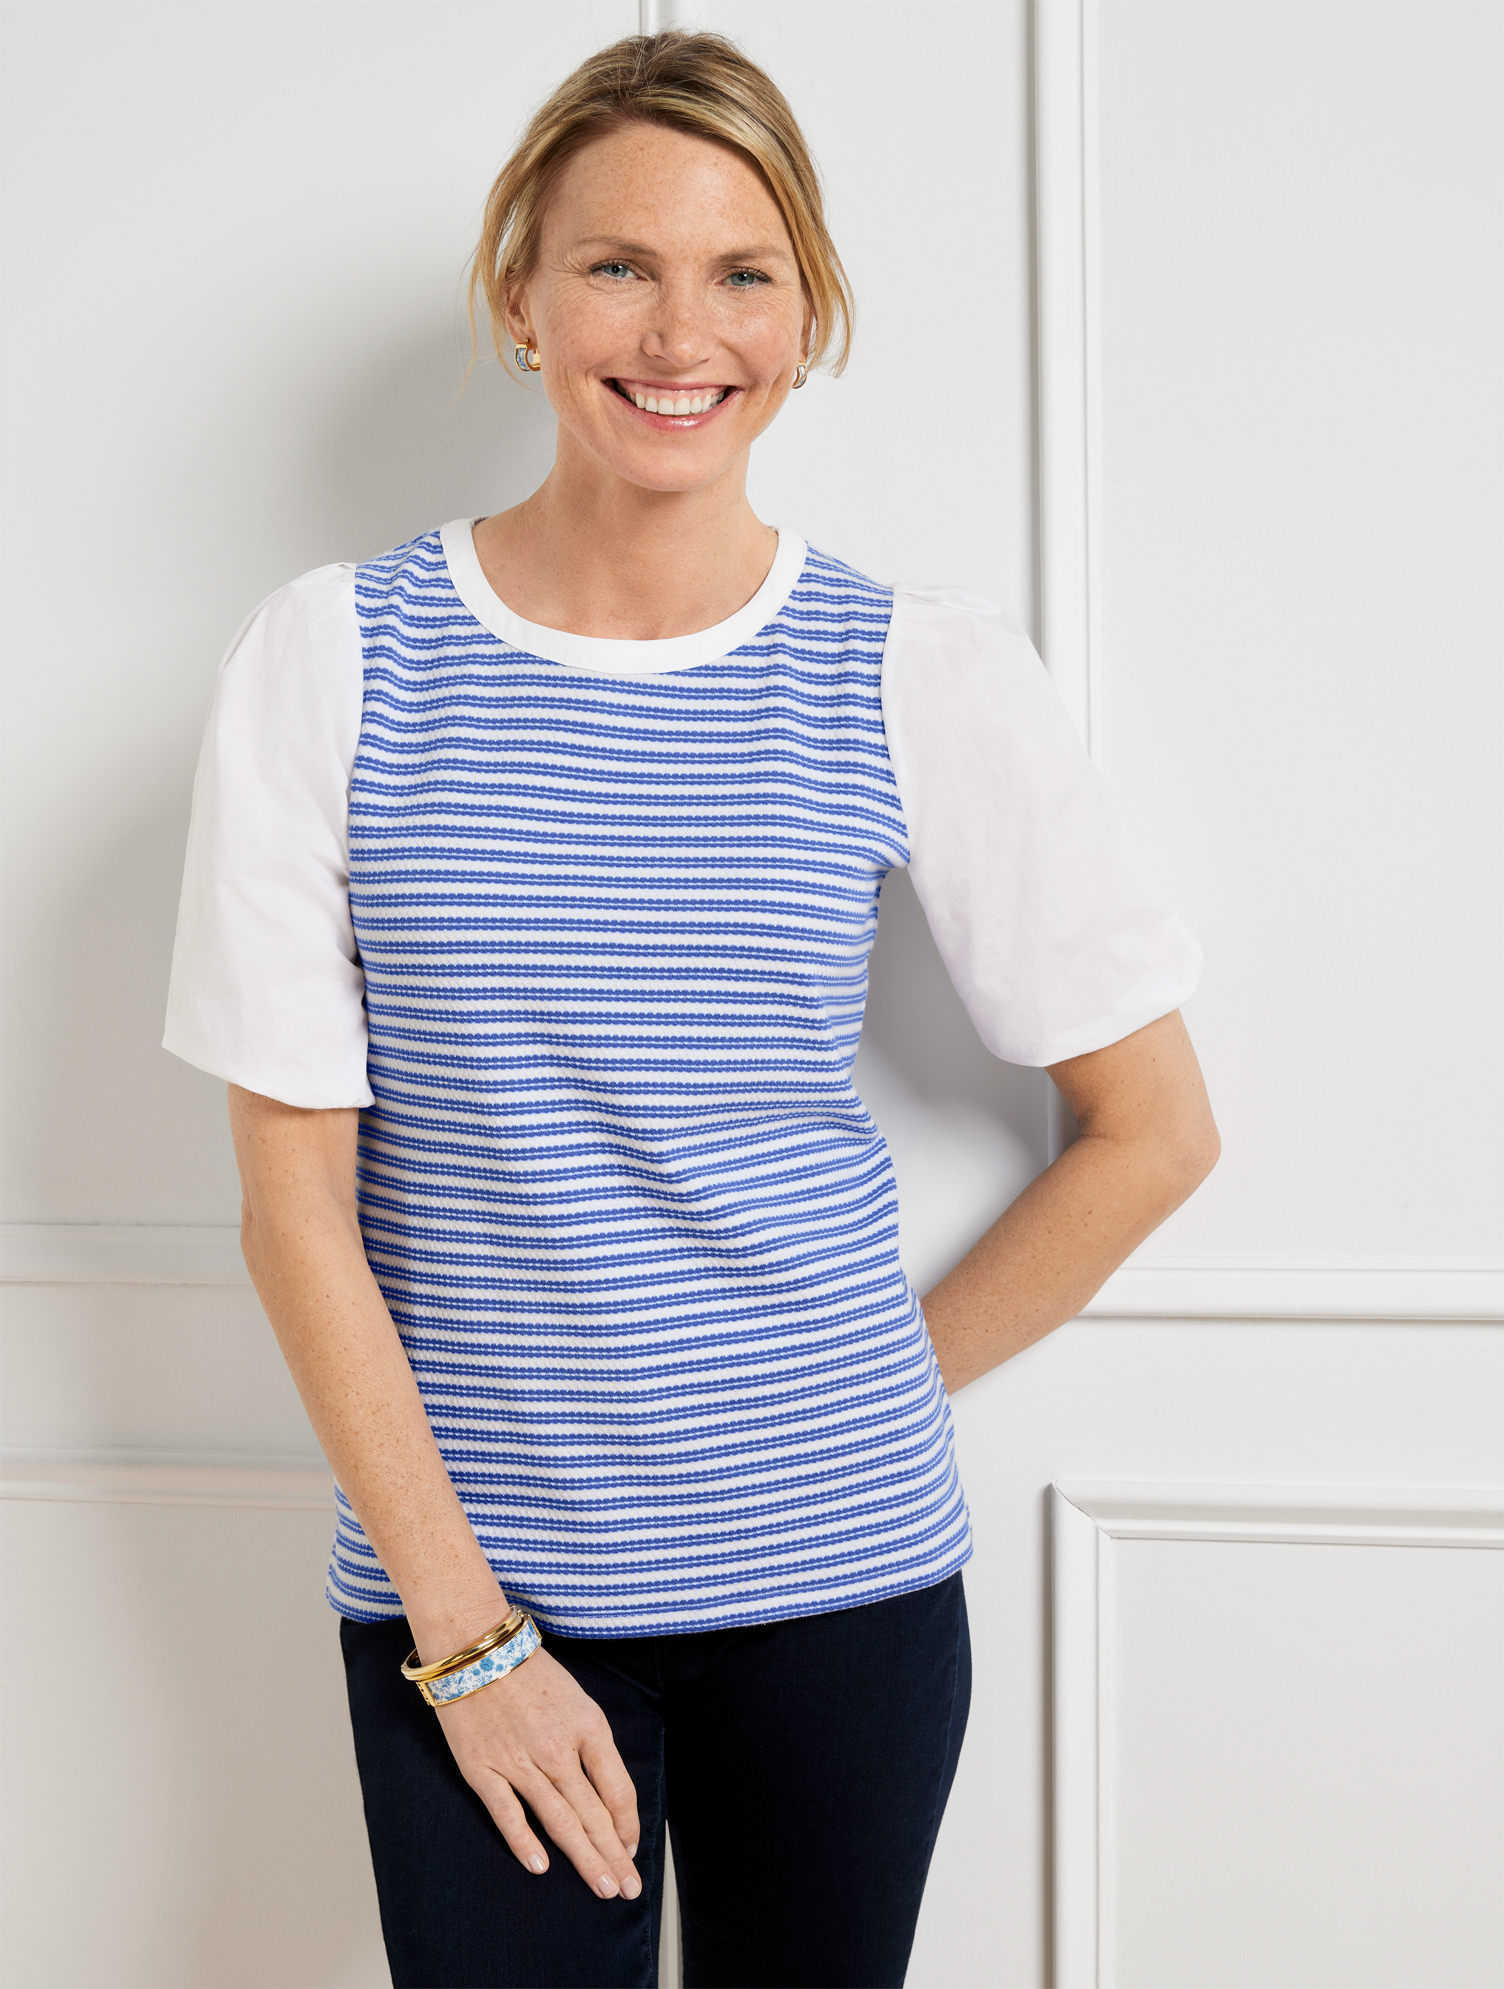 Talbots Petite - Woven Sleeve Crewneck T-shirt - Scallop Stripe - White/biscayne Blue - Large  In White,biscayne Blue